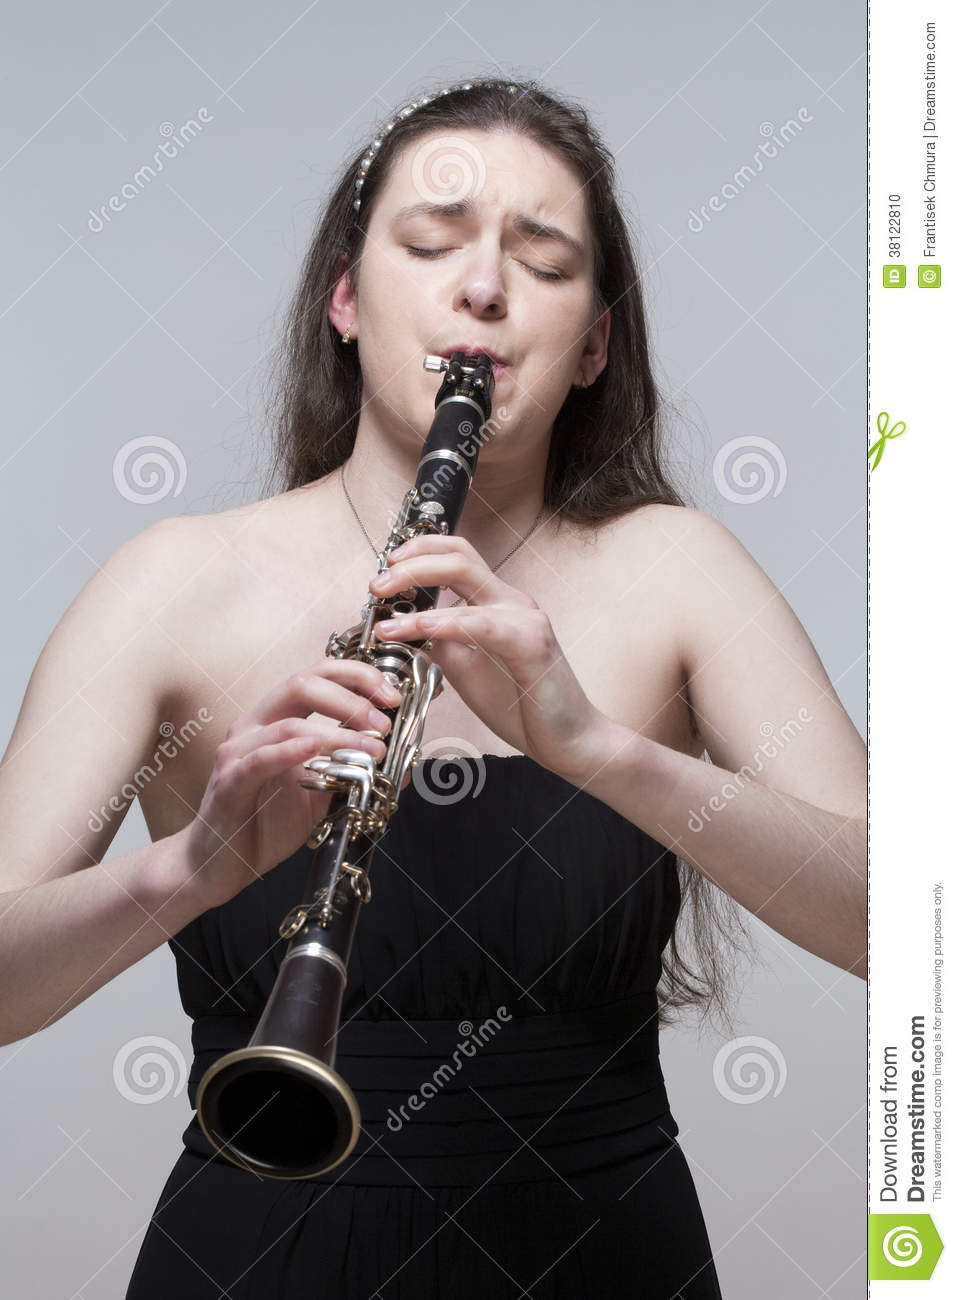 Young Female Musician Playing Clarinet Stock Photo   Image  38122810